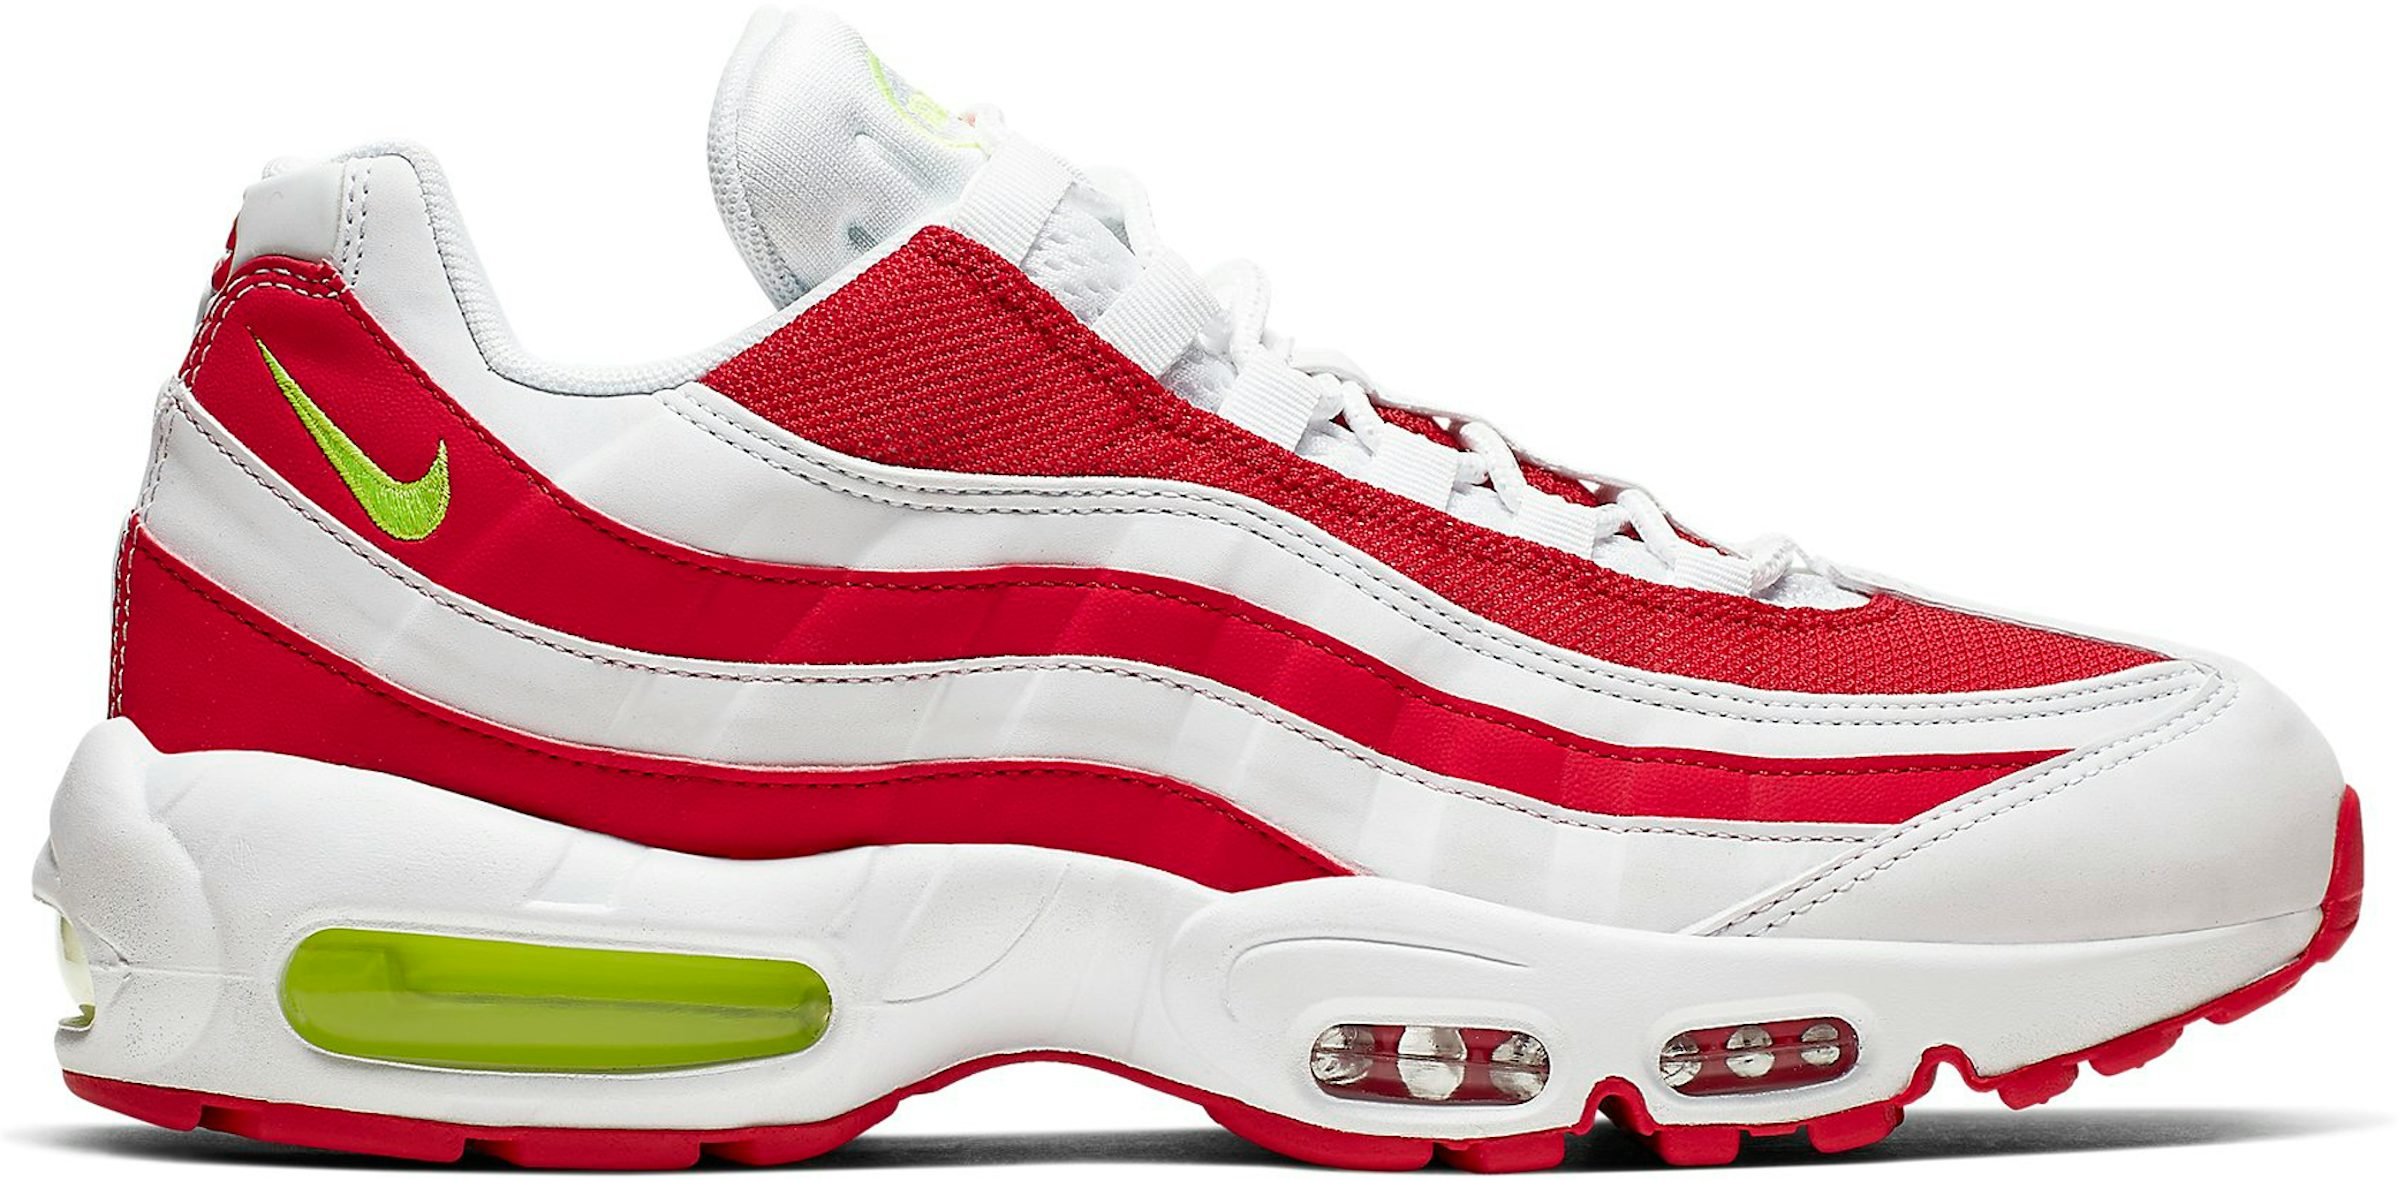 AIR MAX 95 MARINE DAY RED